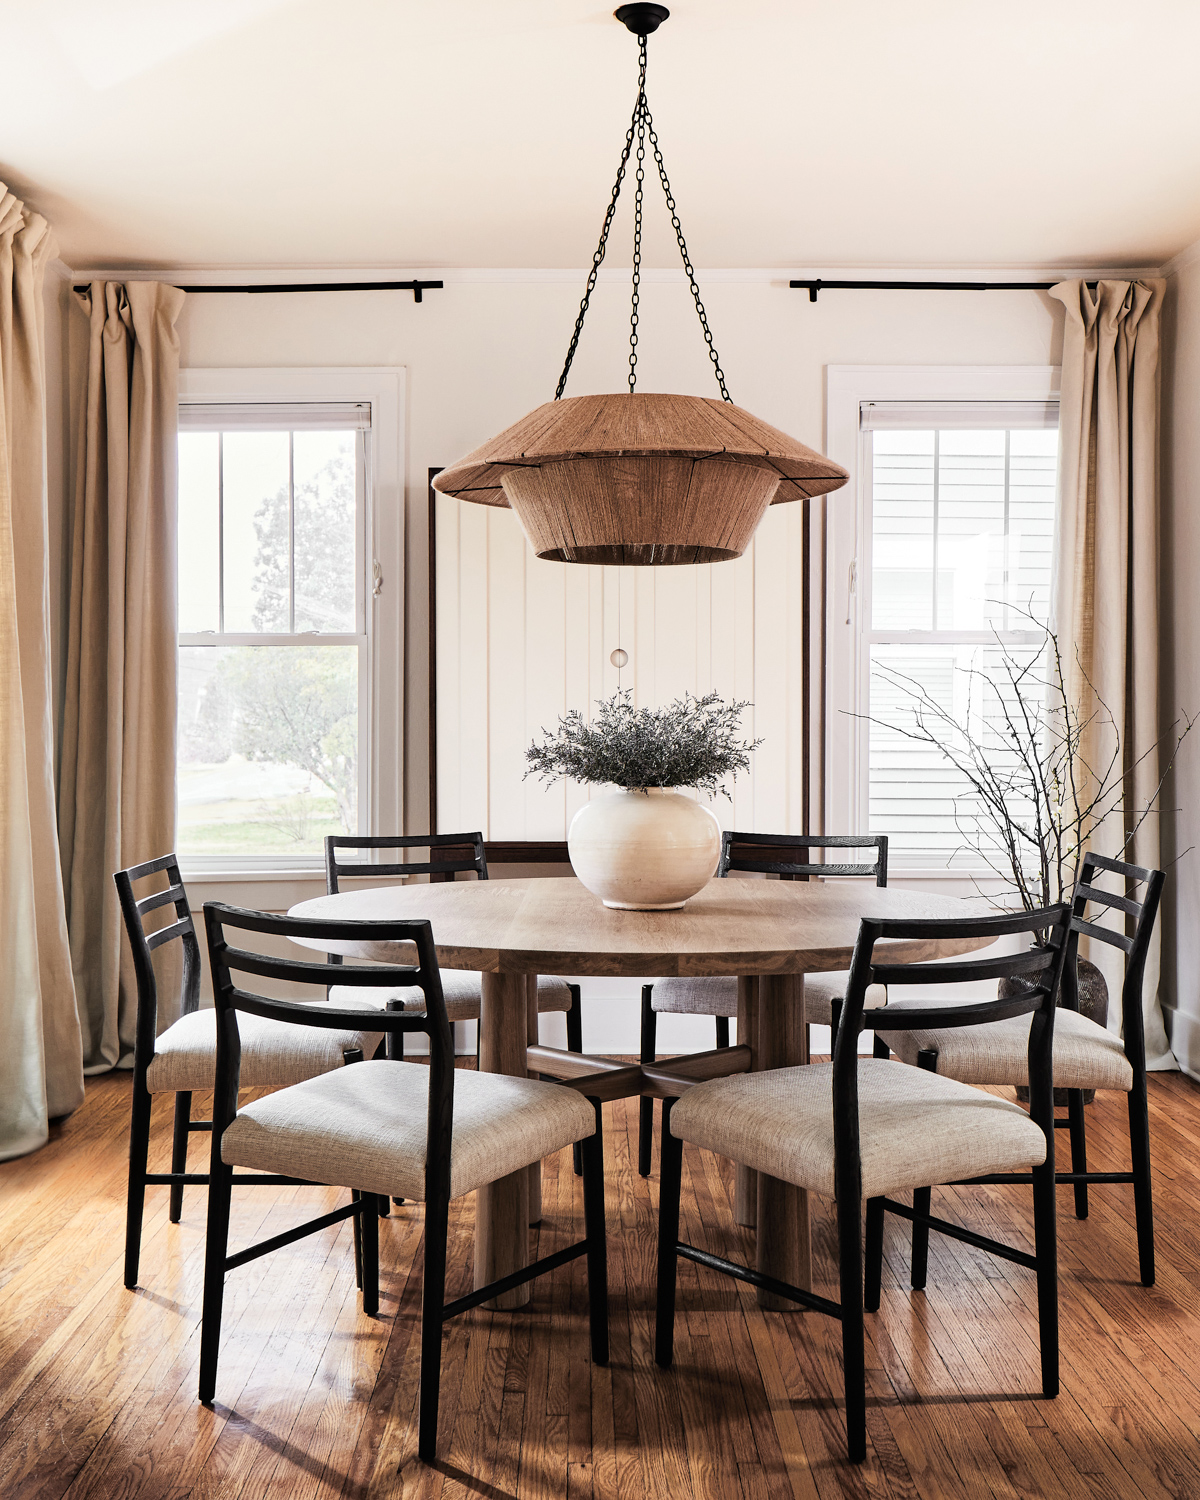 round dining table surrounded by 6 chairs under low-hanging pendant light